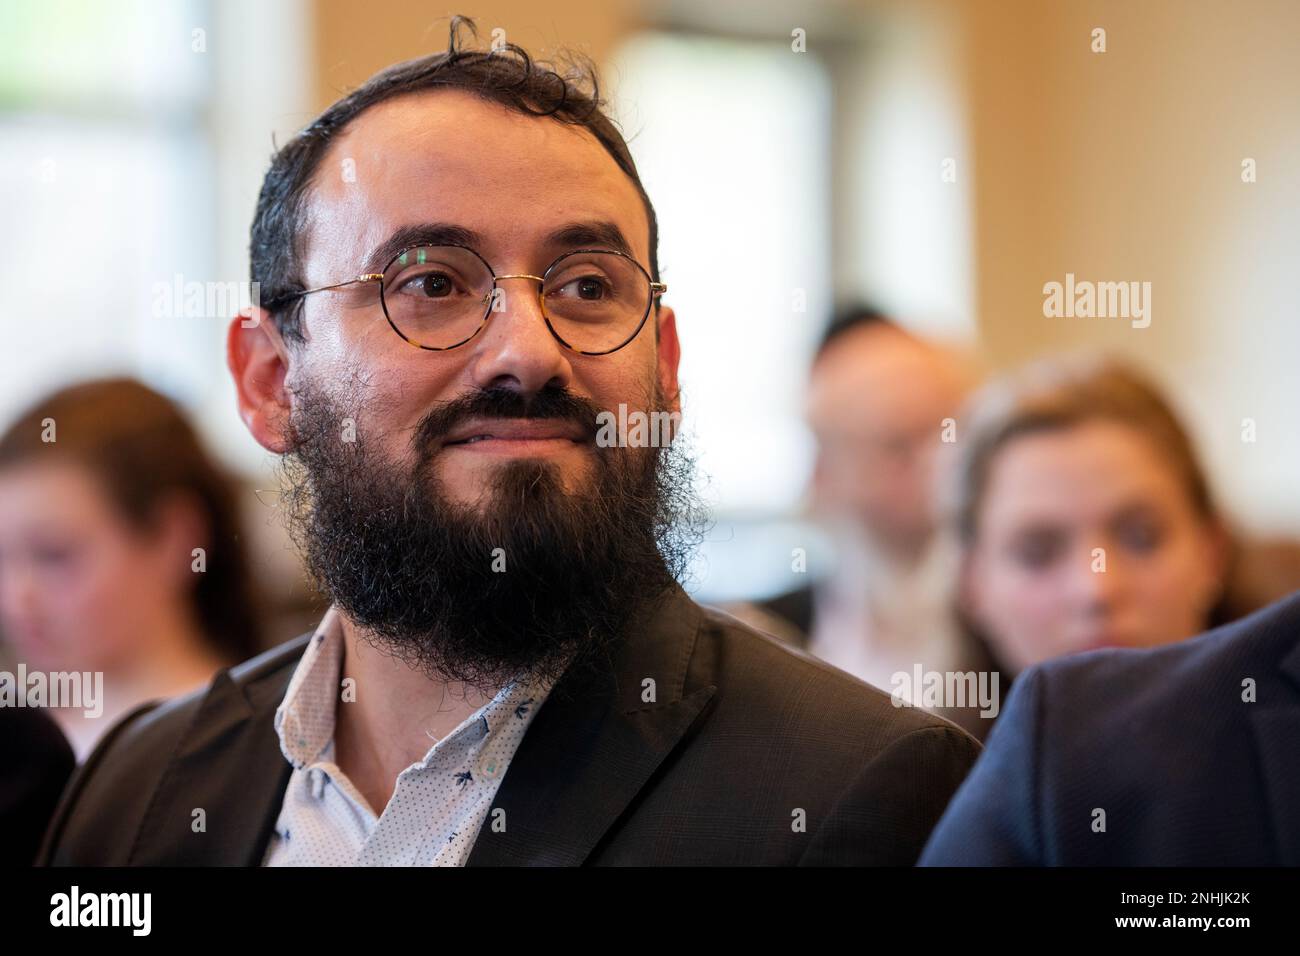 Rabbi Zalman Teldon attends the awards ceremony of his grandfather, U.S. Army Air Corps 1st Lt. Gerald Teldon, retired, recognizing his honorable service as a pilot on July 29, 2022, at the Chabad Center for Jewish Life and Learning, San Antonio, Texas. Teldon, born in Bronx, N.Y., in 1924, joined the military in 1944. He completed 62 missions during WWII and the Korean War. Lt. Col. Andrew Stein, 502nd Operations Support Squadron commander, was the presiding officers. The awards presented to Teldon are as follows: the Air Medal; American Campaign Medal; European – African – Middle Eastern Cam Stock Photo